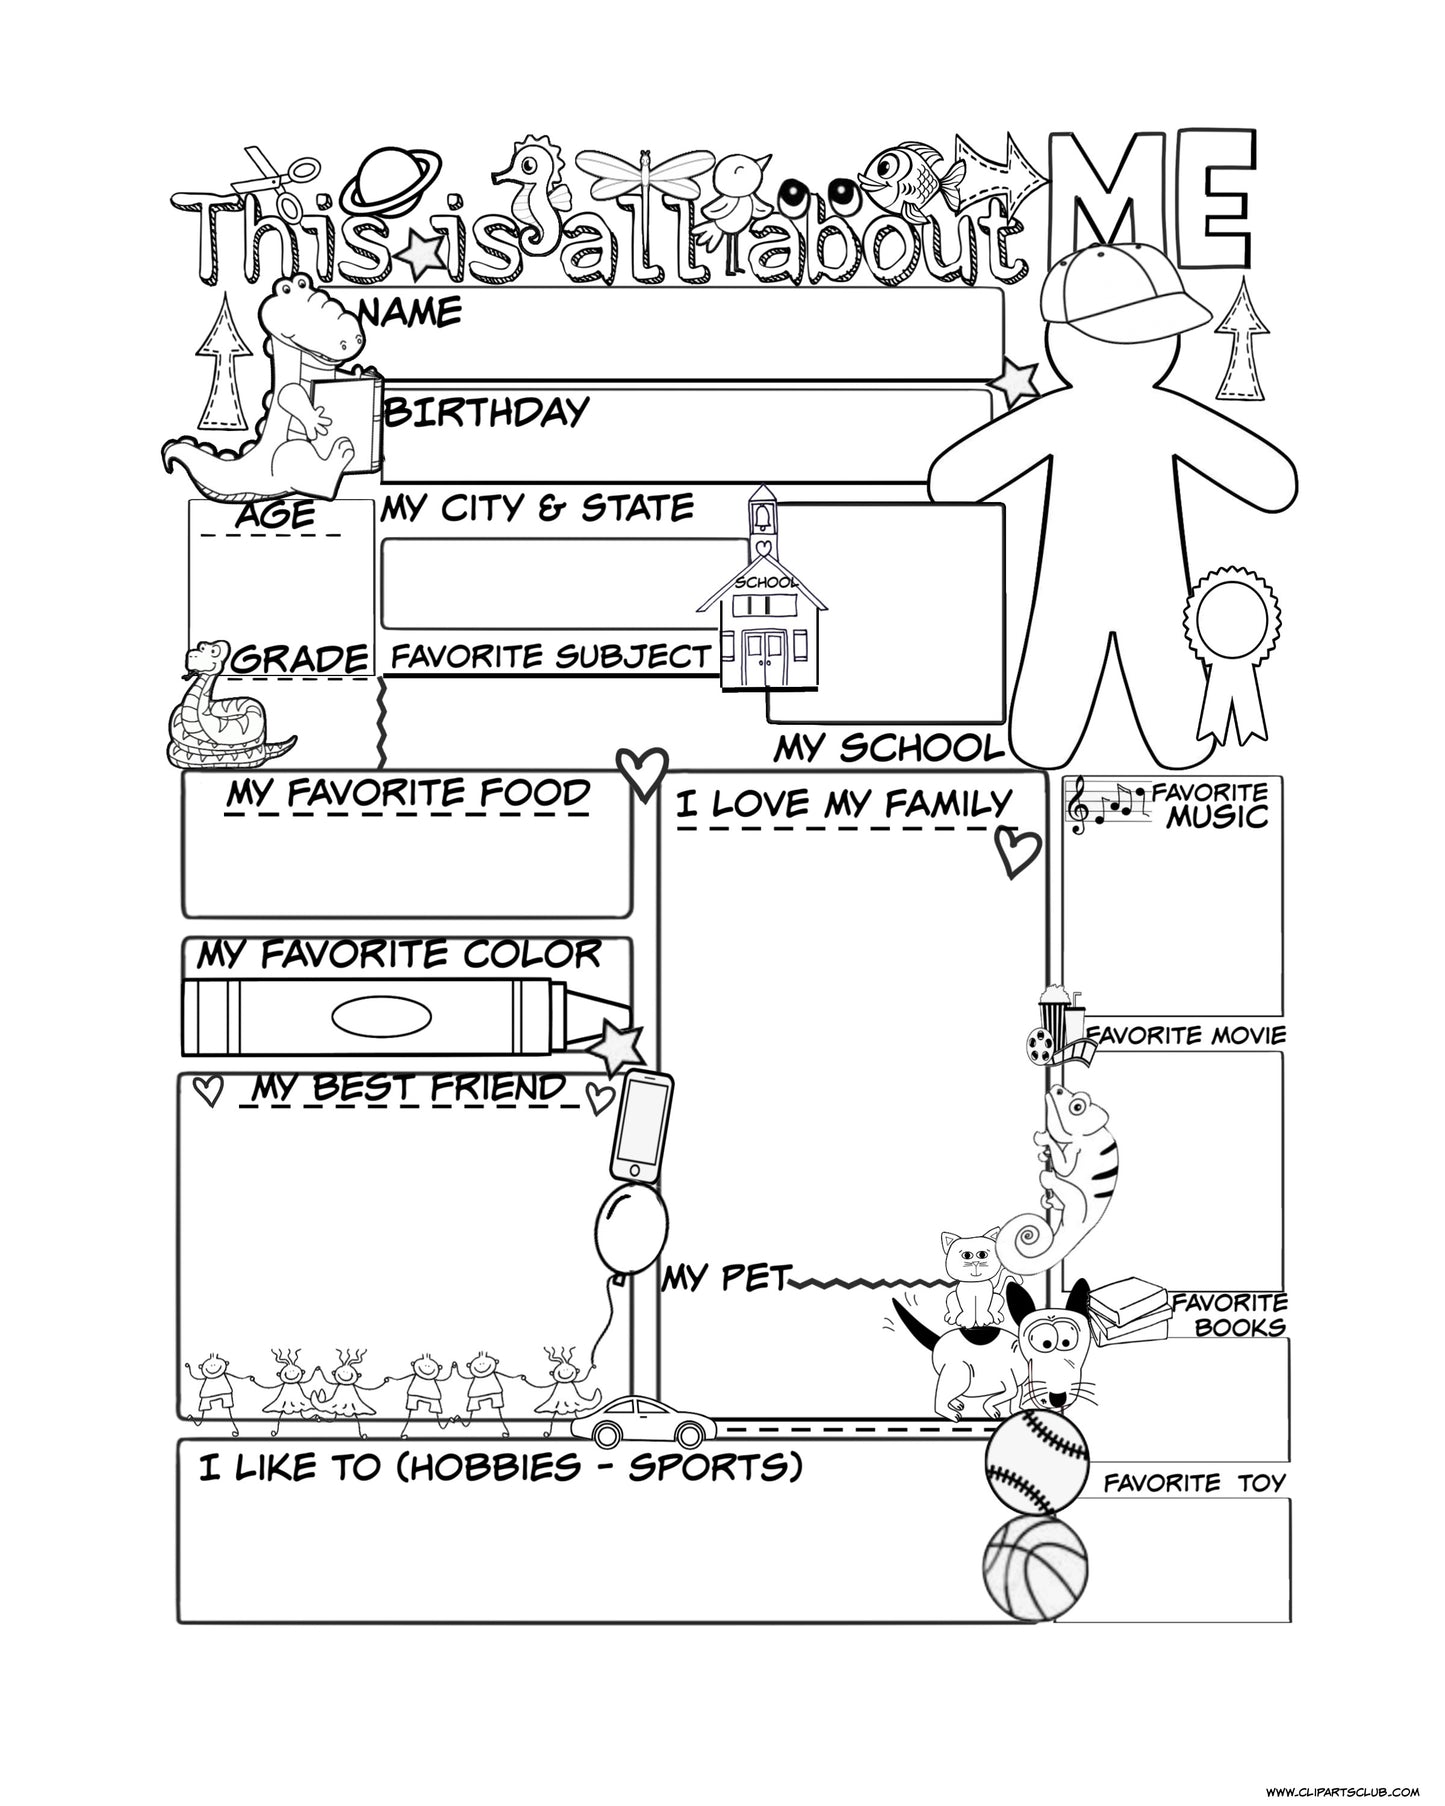 All About Me Boys Coloring Page - Craft - Gift -8x10 Frame Ready